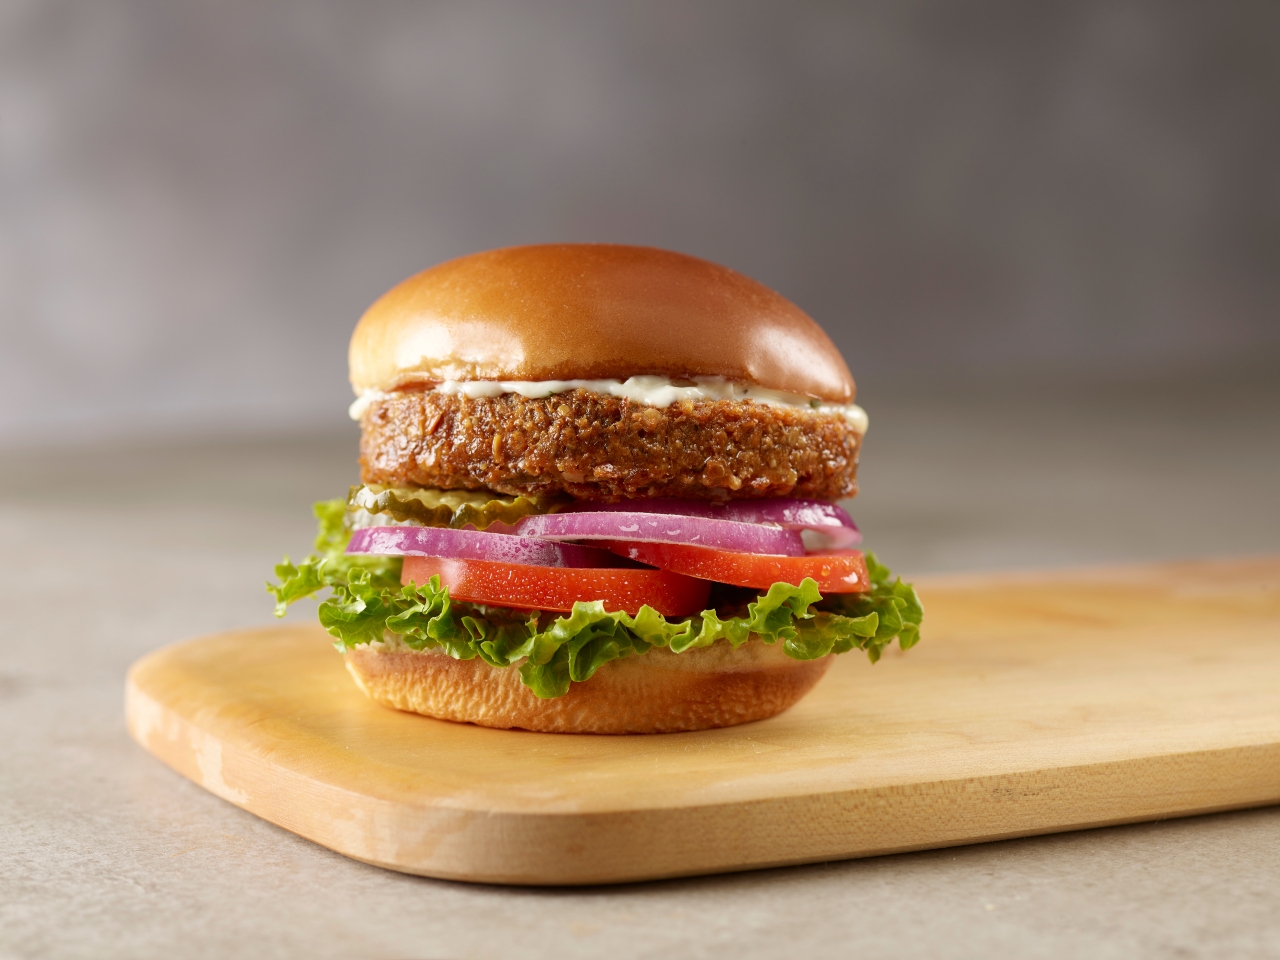 A stacked burger with lettuce, tomato, red onion, pickles, and a juicy veggie patty even a carnivore would approve of.